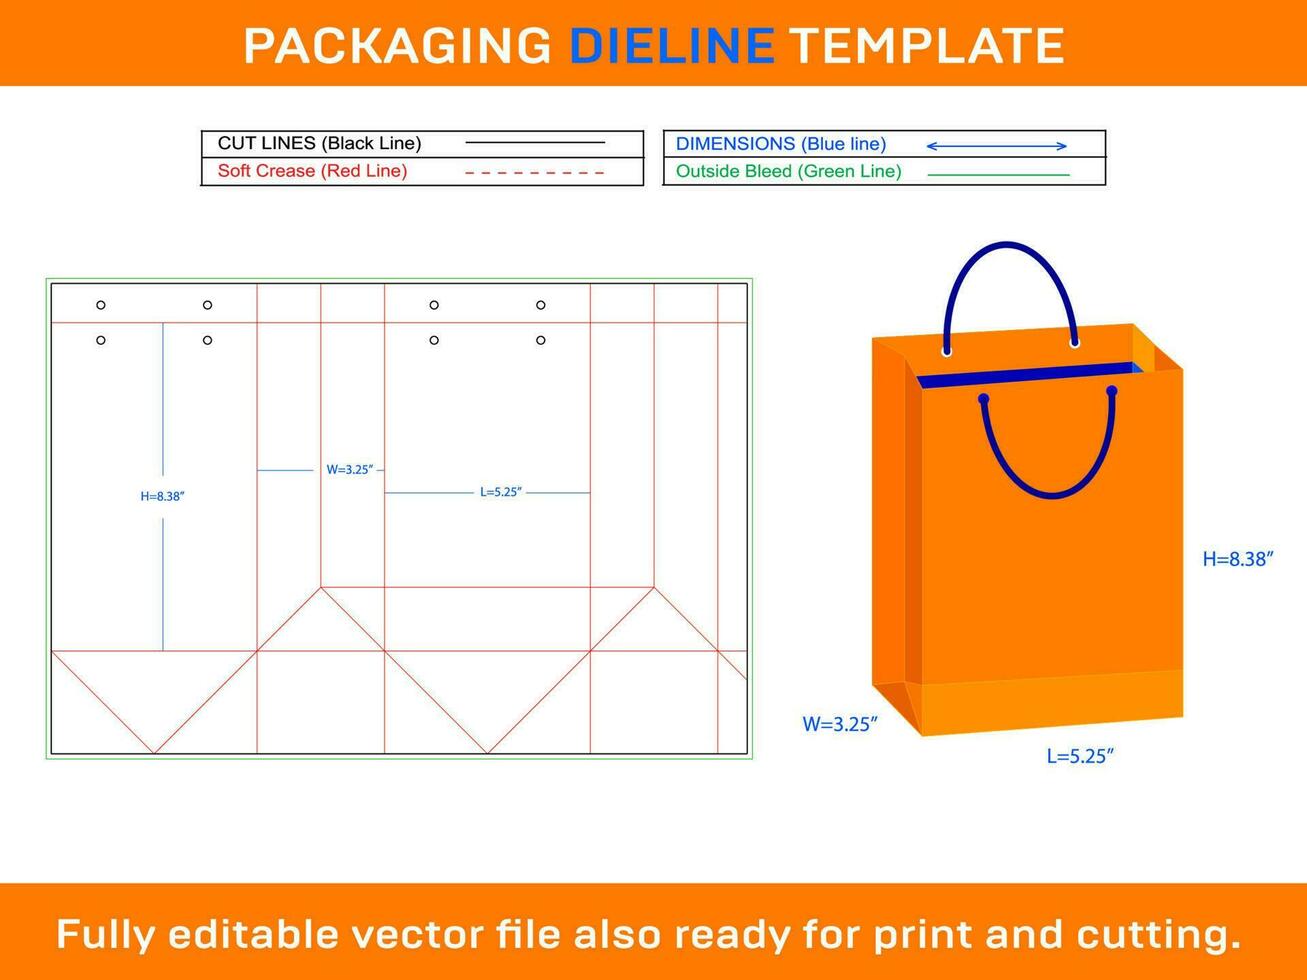 Shopping bag Dieline Template 5.25x3.25x8.38 inch vector